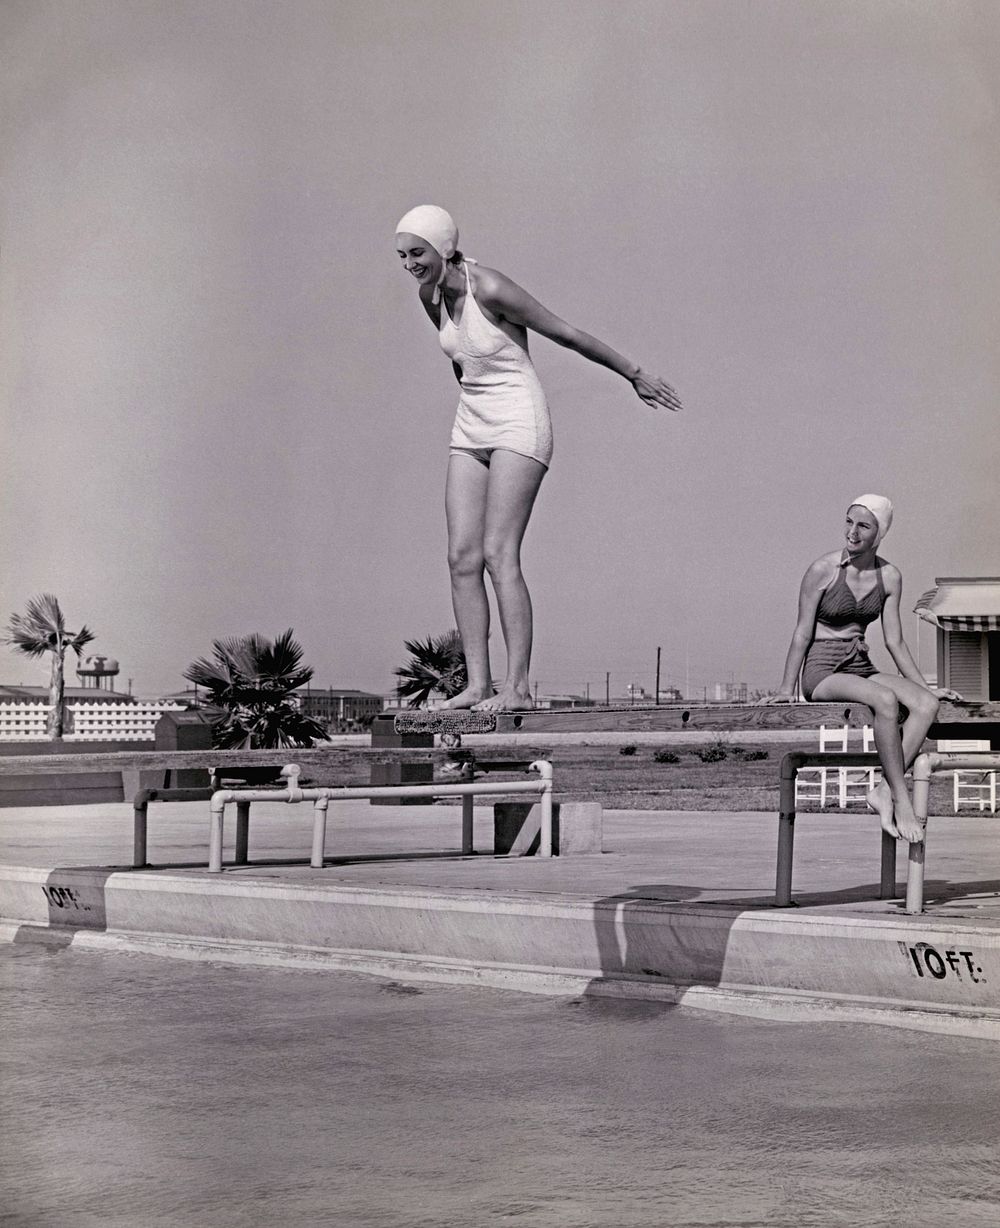 Women on diving board at swimming pool, vintage black and white photo, remix composite image.